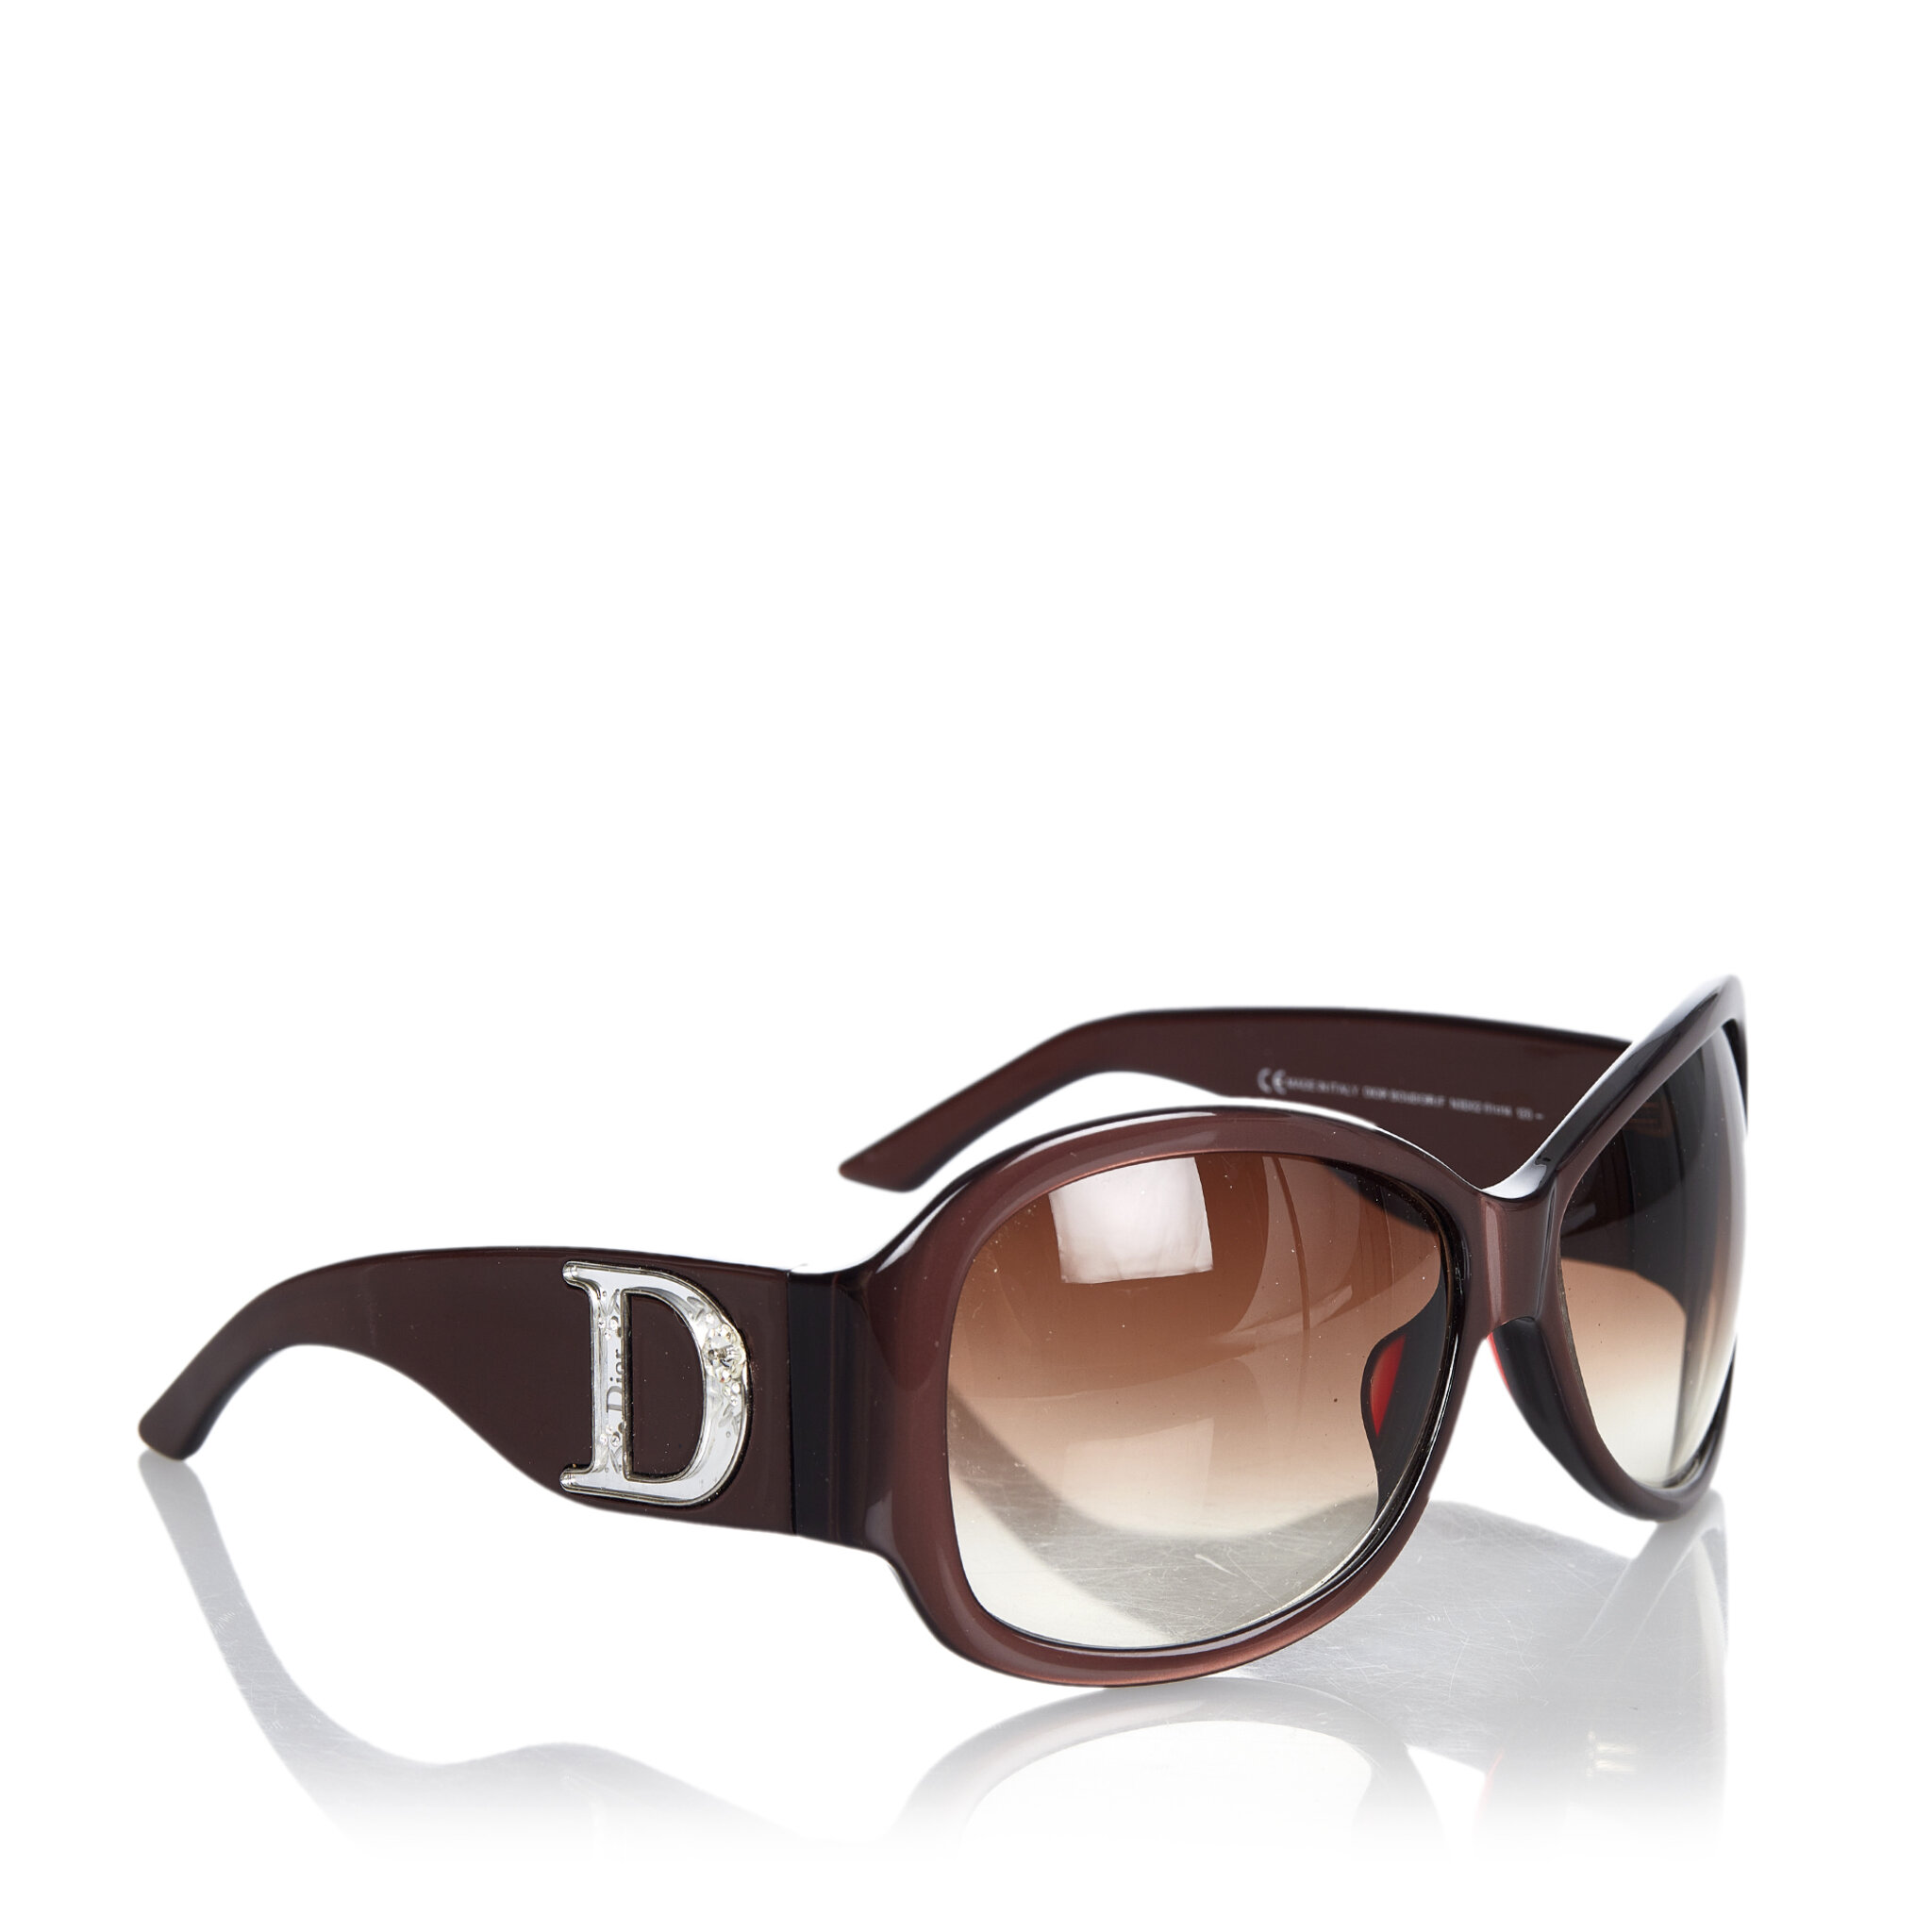 Dior Round Tinted Sunglasses, ONESIZE, brown